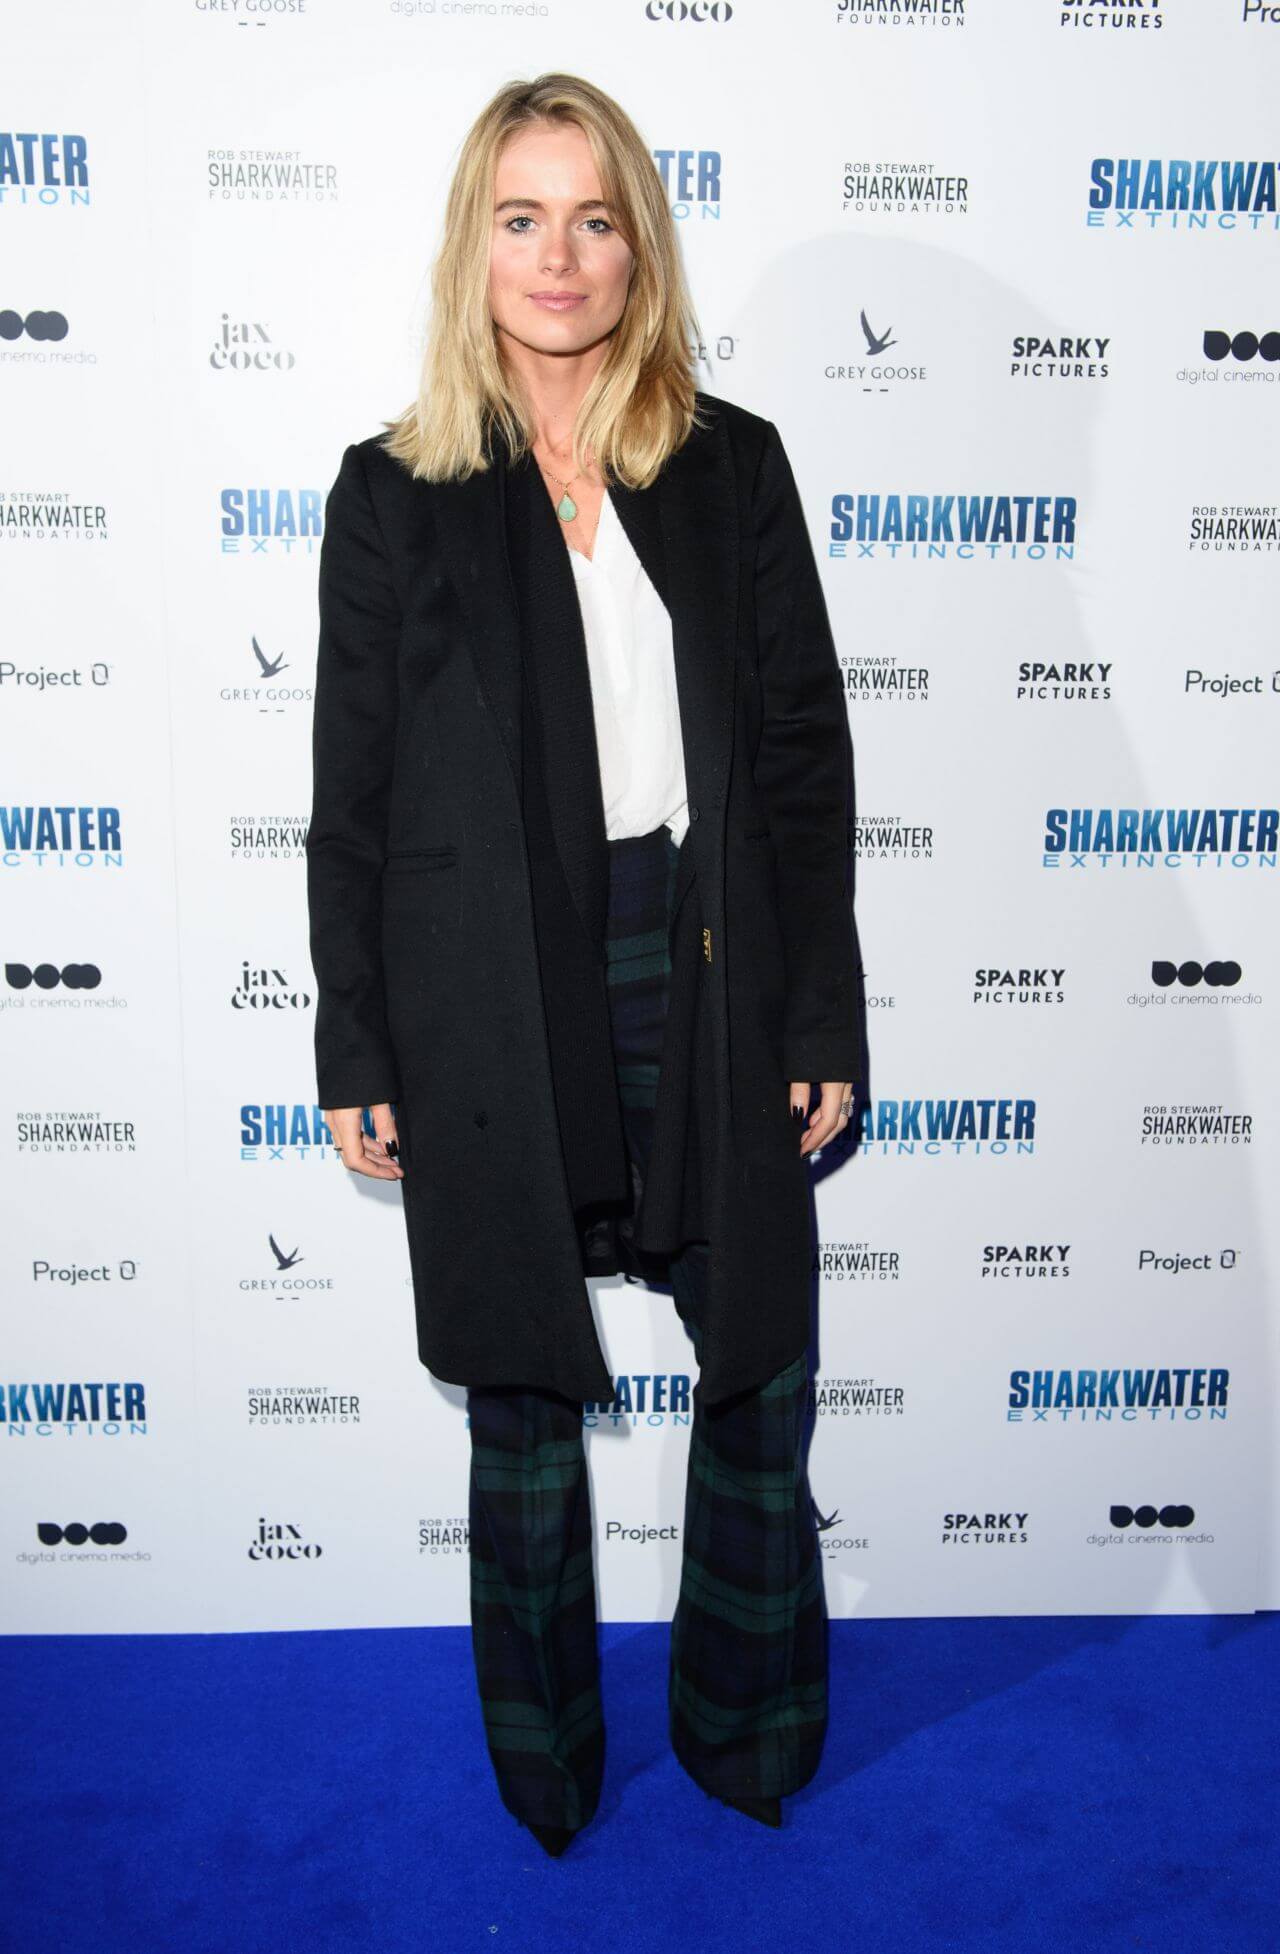 Cressida Bonas  In Black Long Coat Under White Top With Checked Pants At “Sharkwater Extinction” Premiere in London